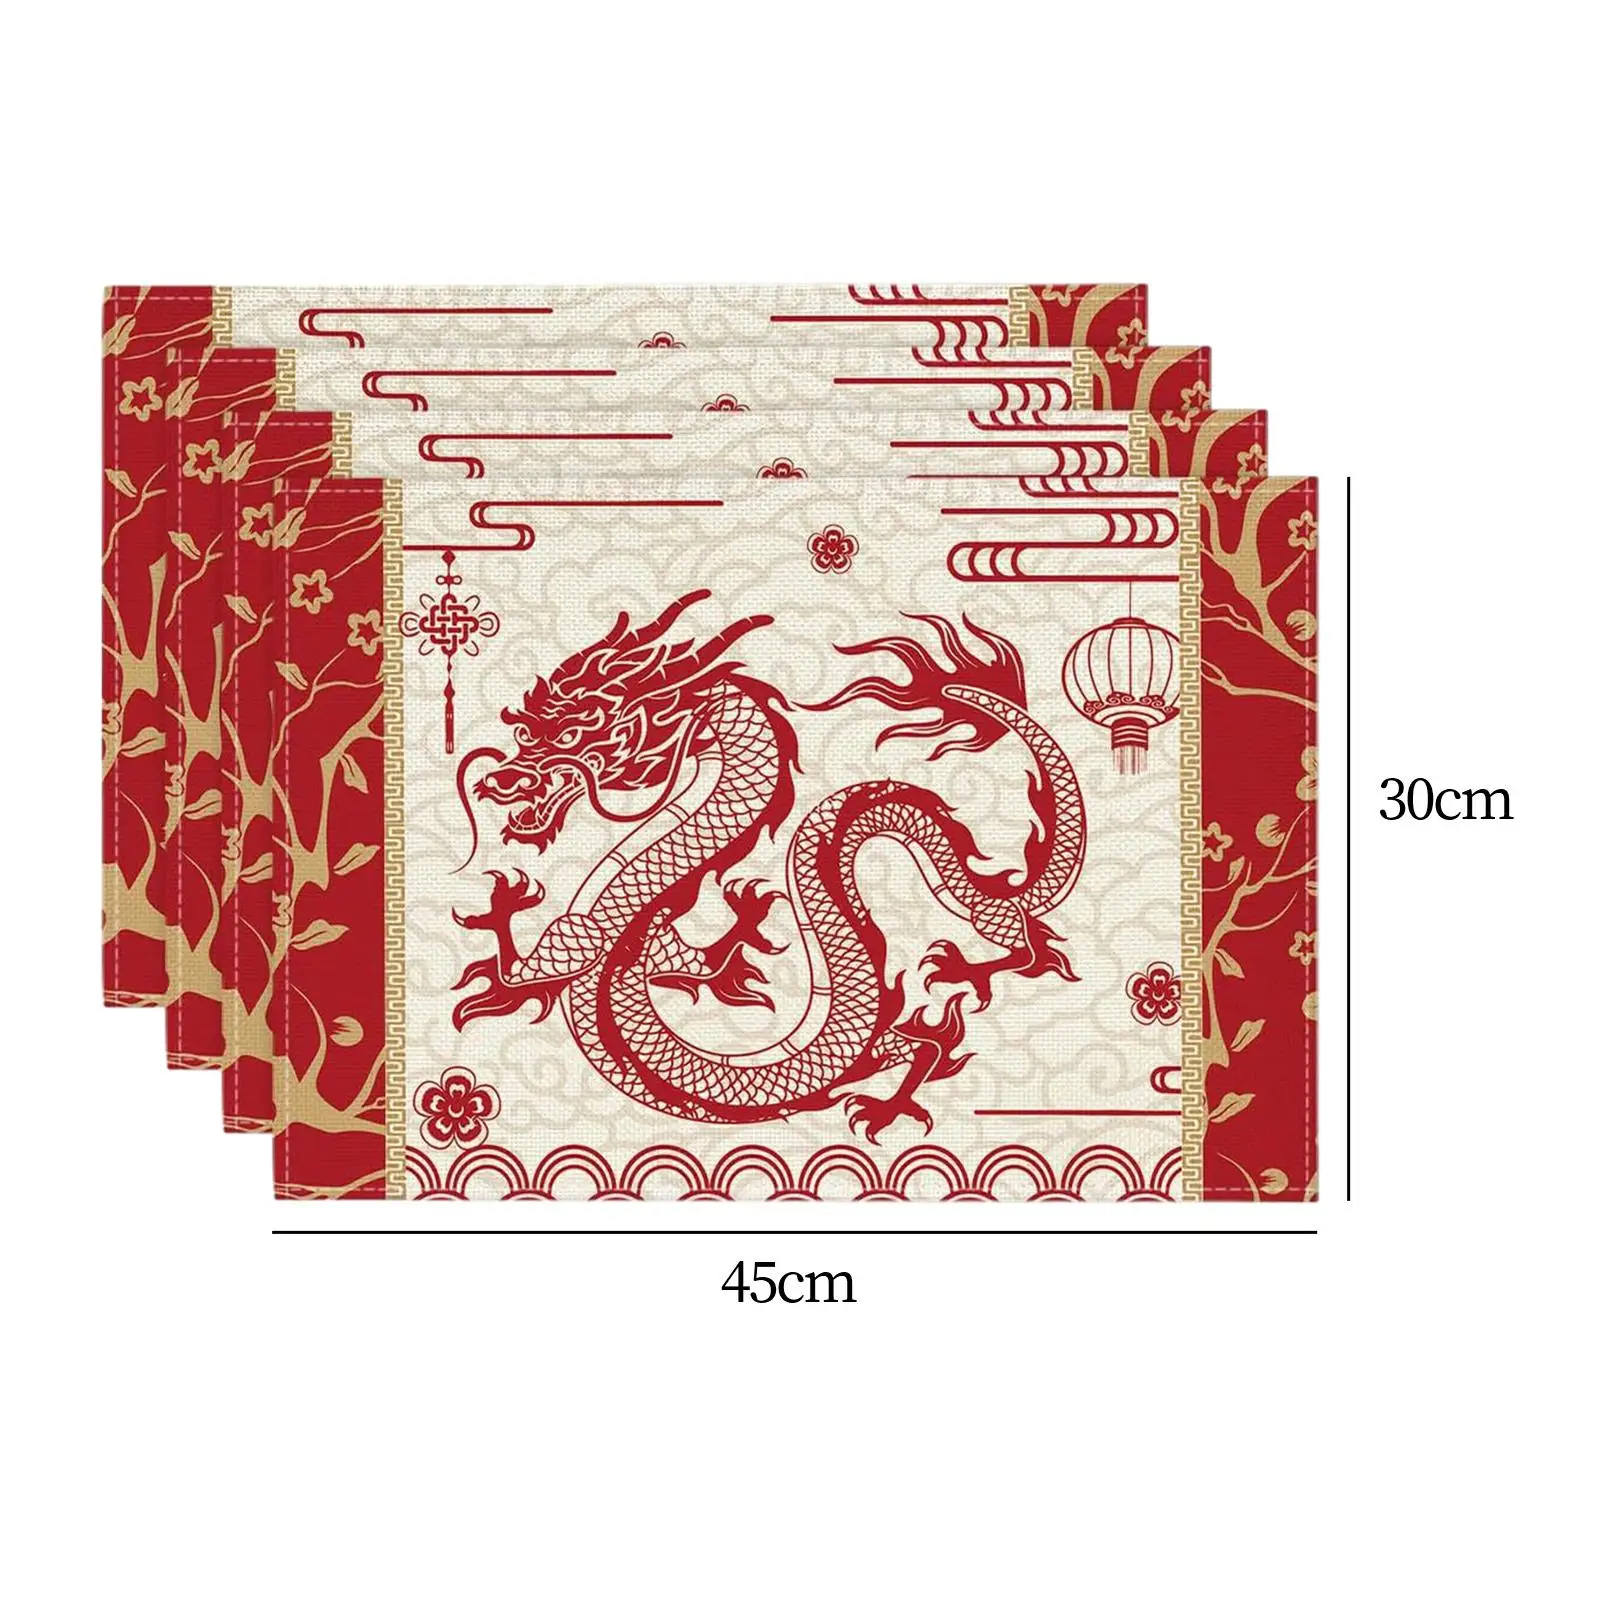 Chinese New Year Placemats Place Mats Set of 4 Happy New Year Table Decoration